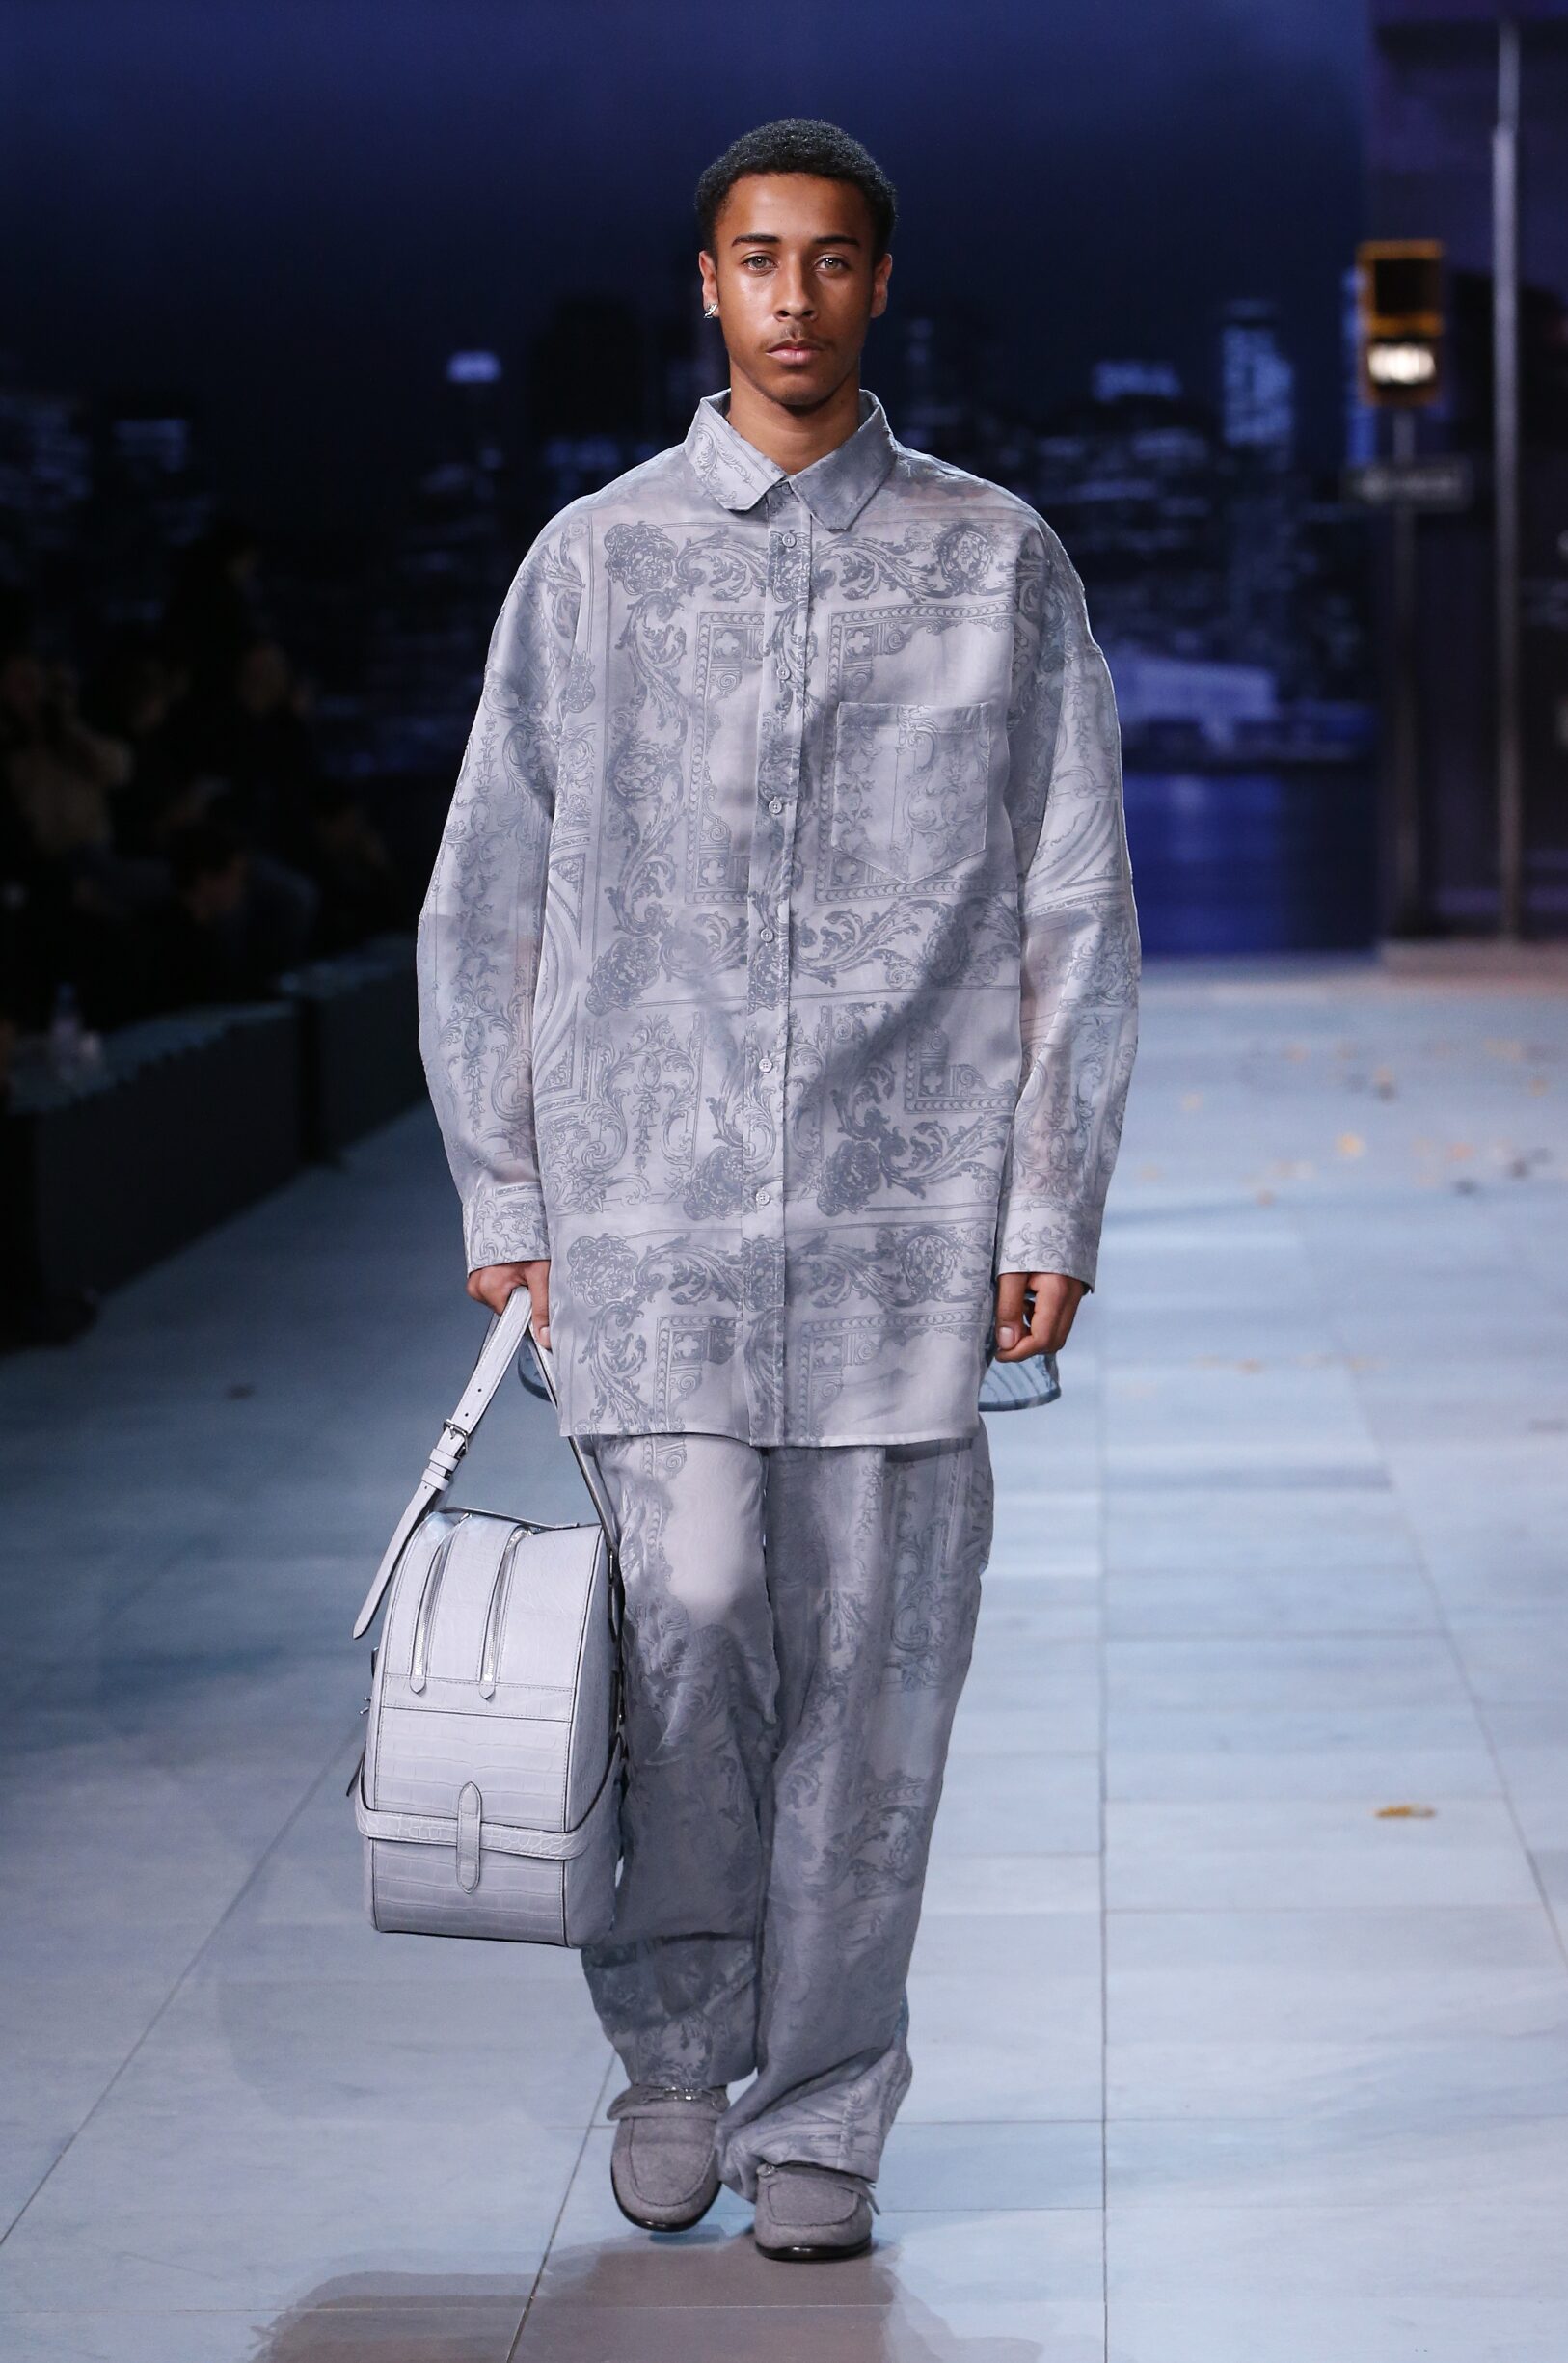 Louis Vuitton fashion collection influenced by Charlotte Perriand